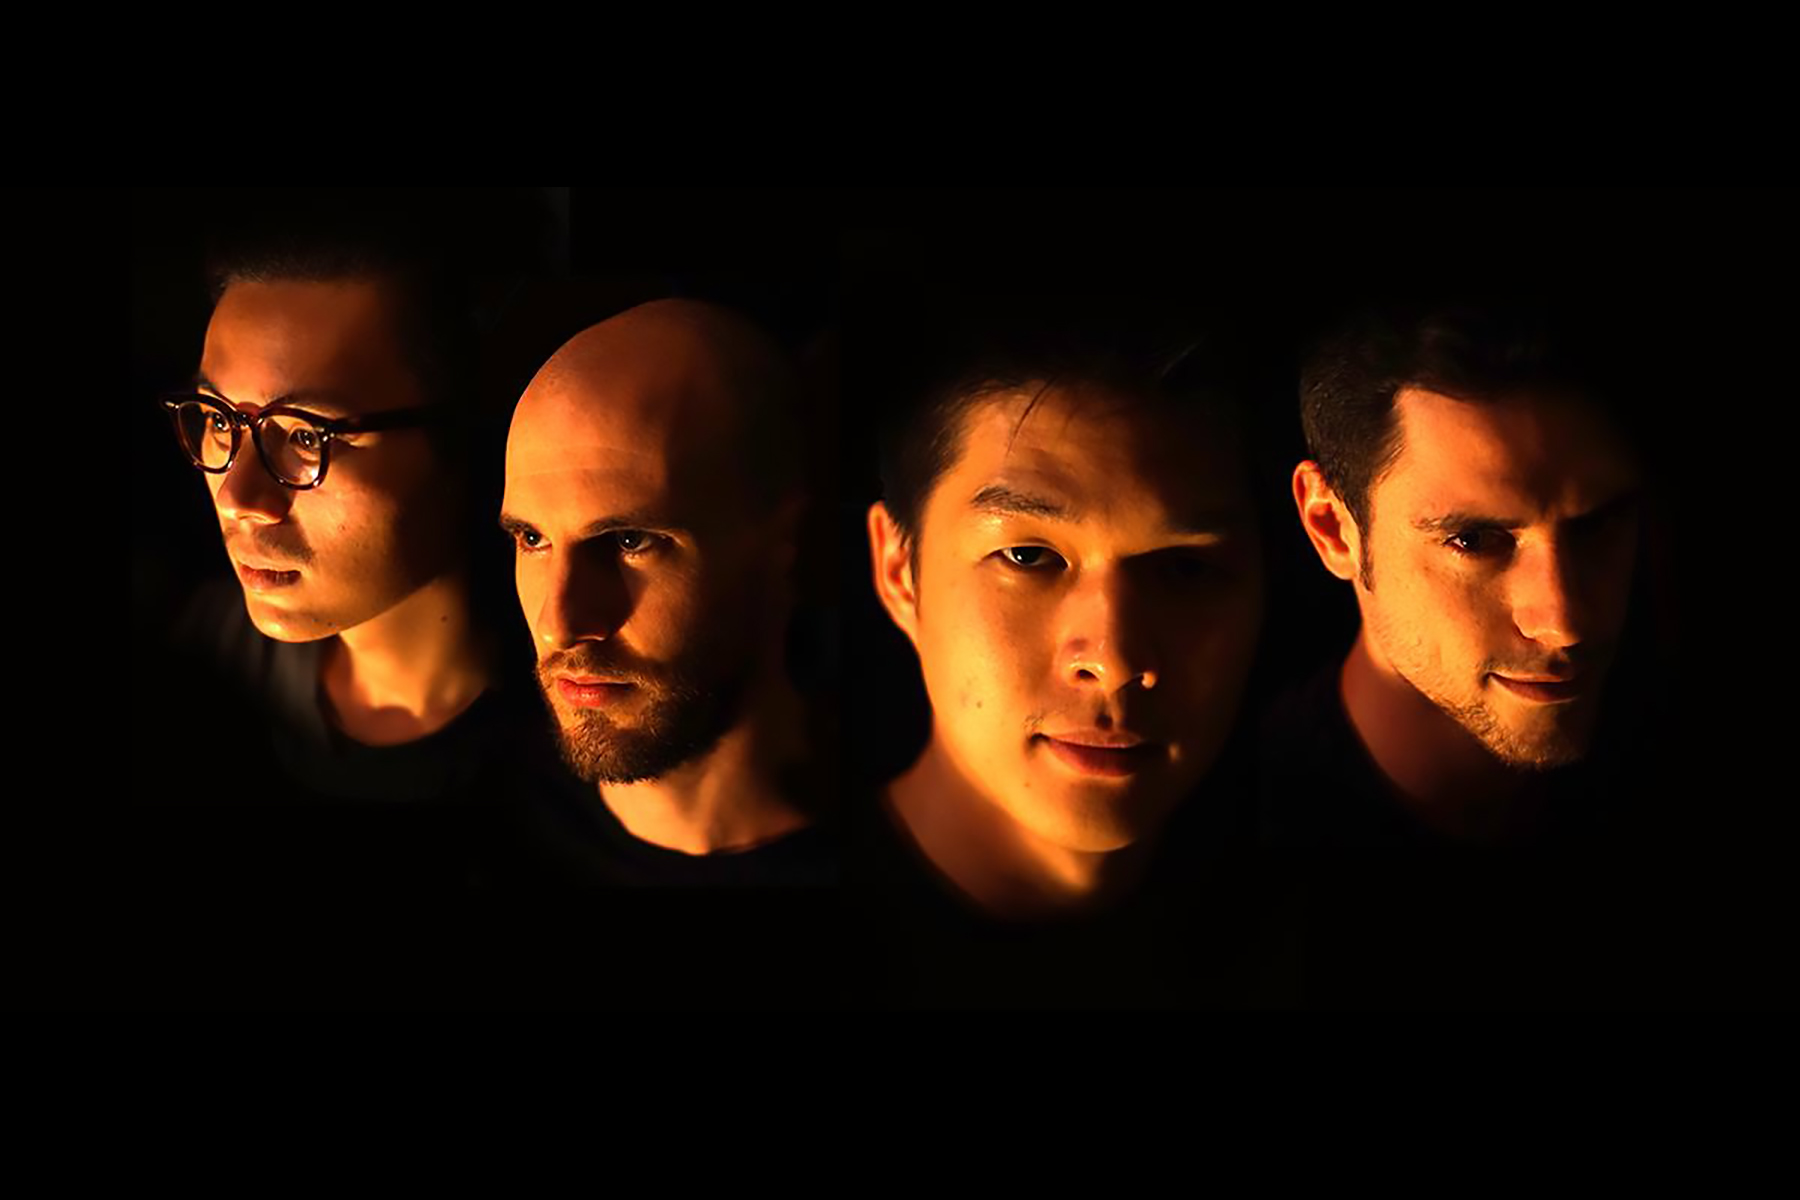 Meet Omicron: A Hong Kong Metal Band, That shares the name with Covid Variant